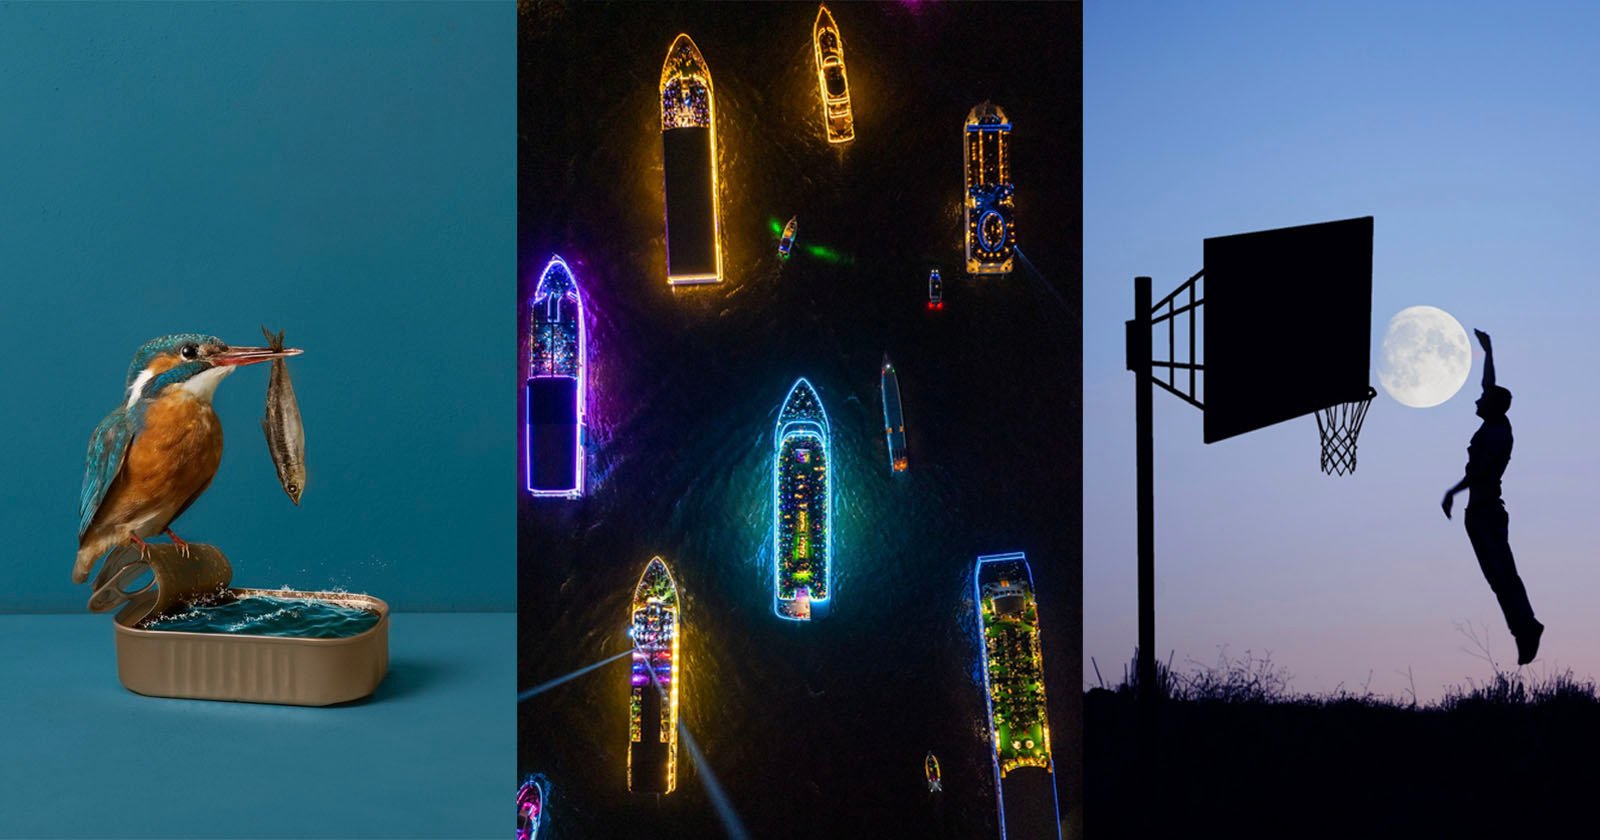 Color Photography Competition Celebrates All the Worlds Hues